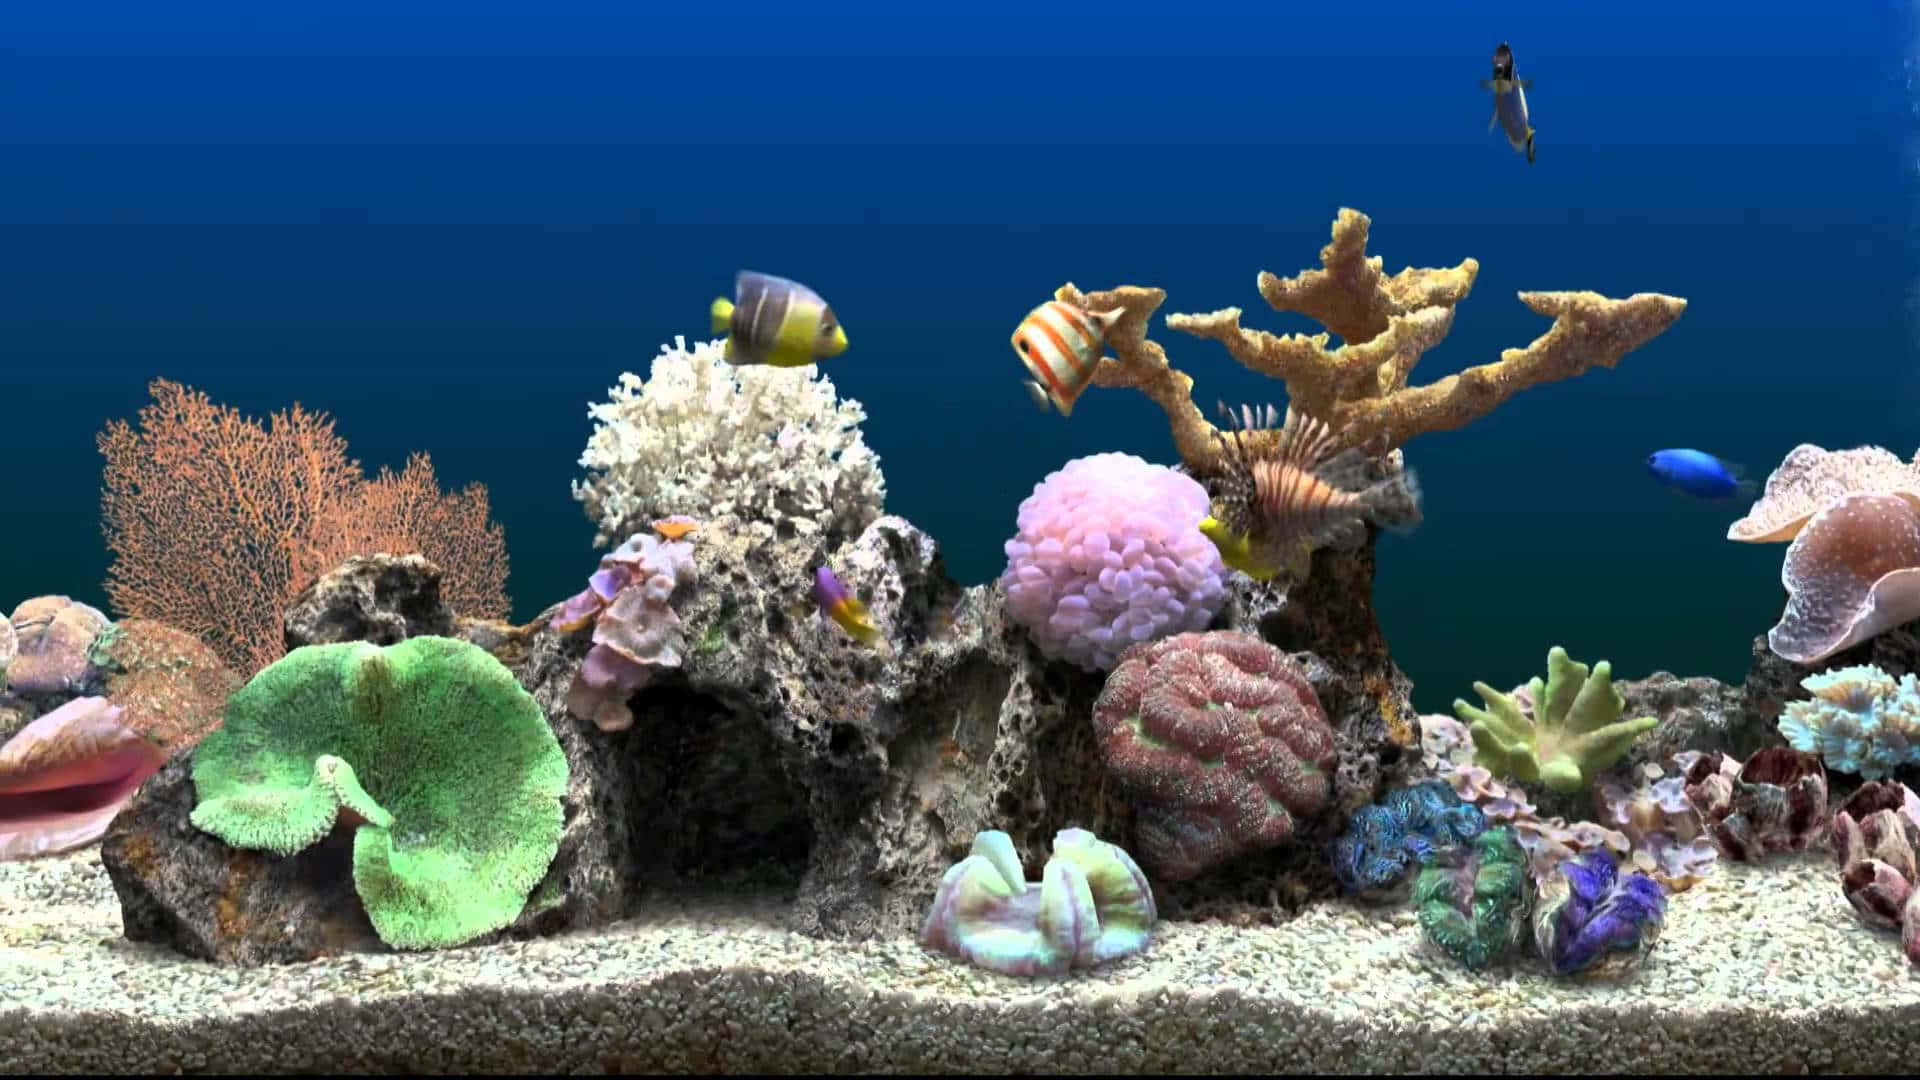 Image  A peaceful 3d view of an underwater aquarium